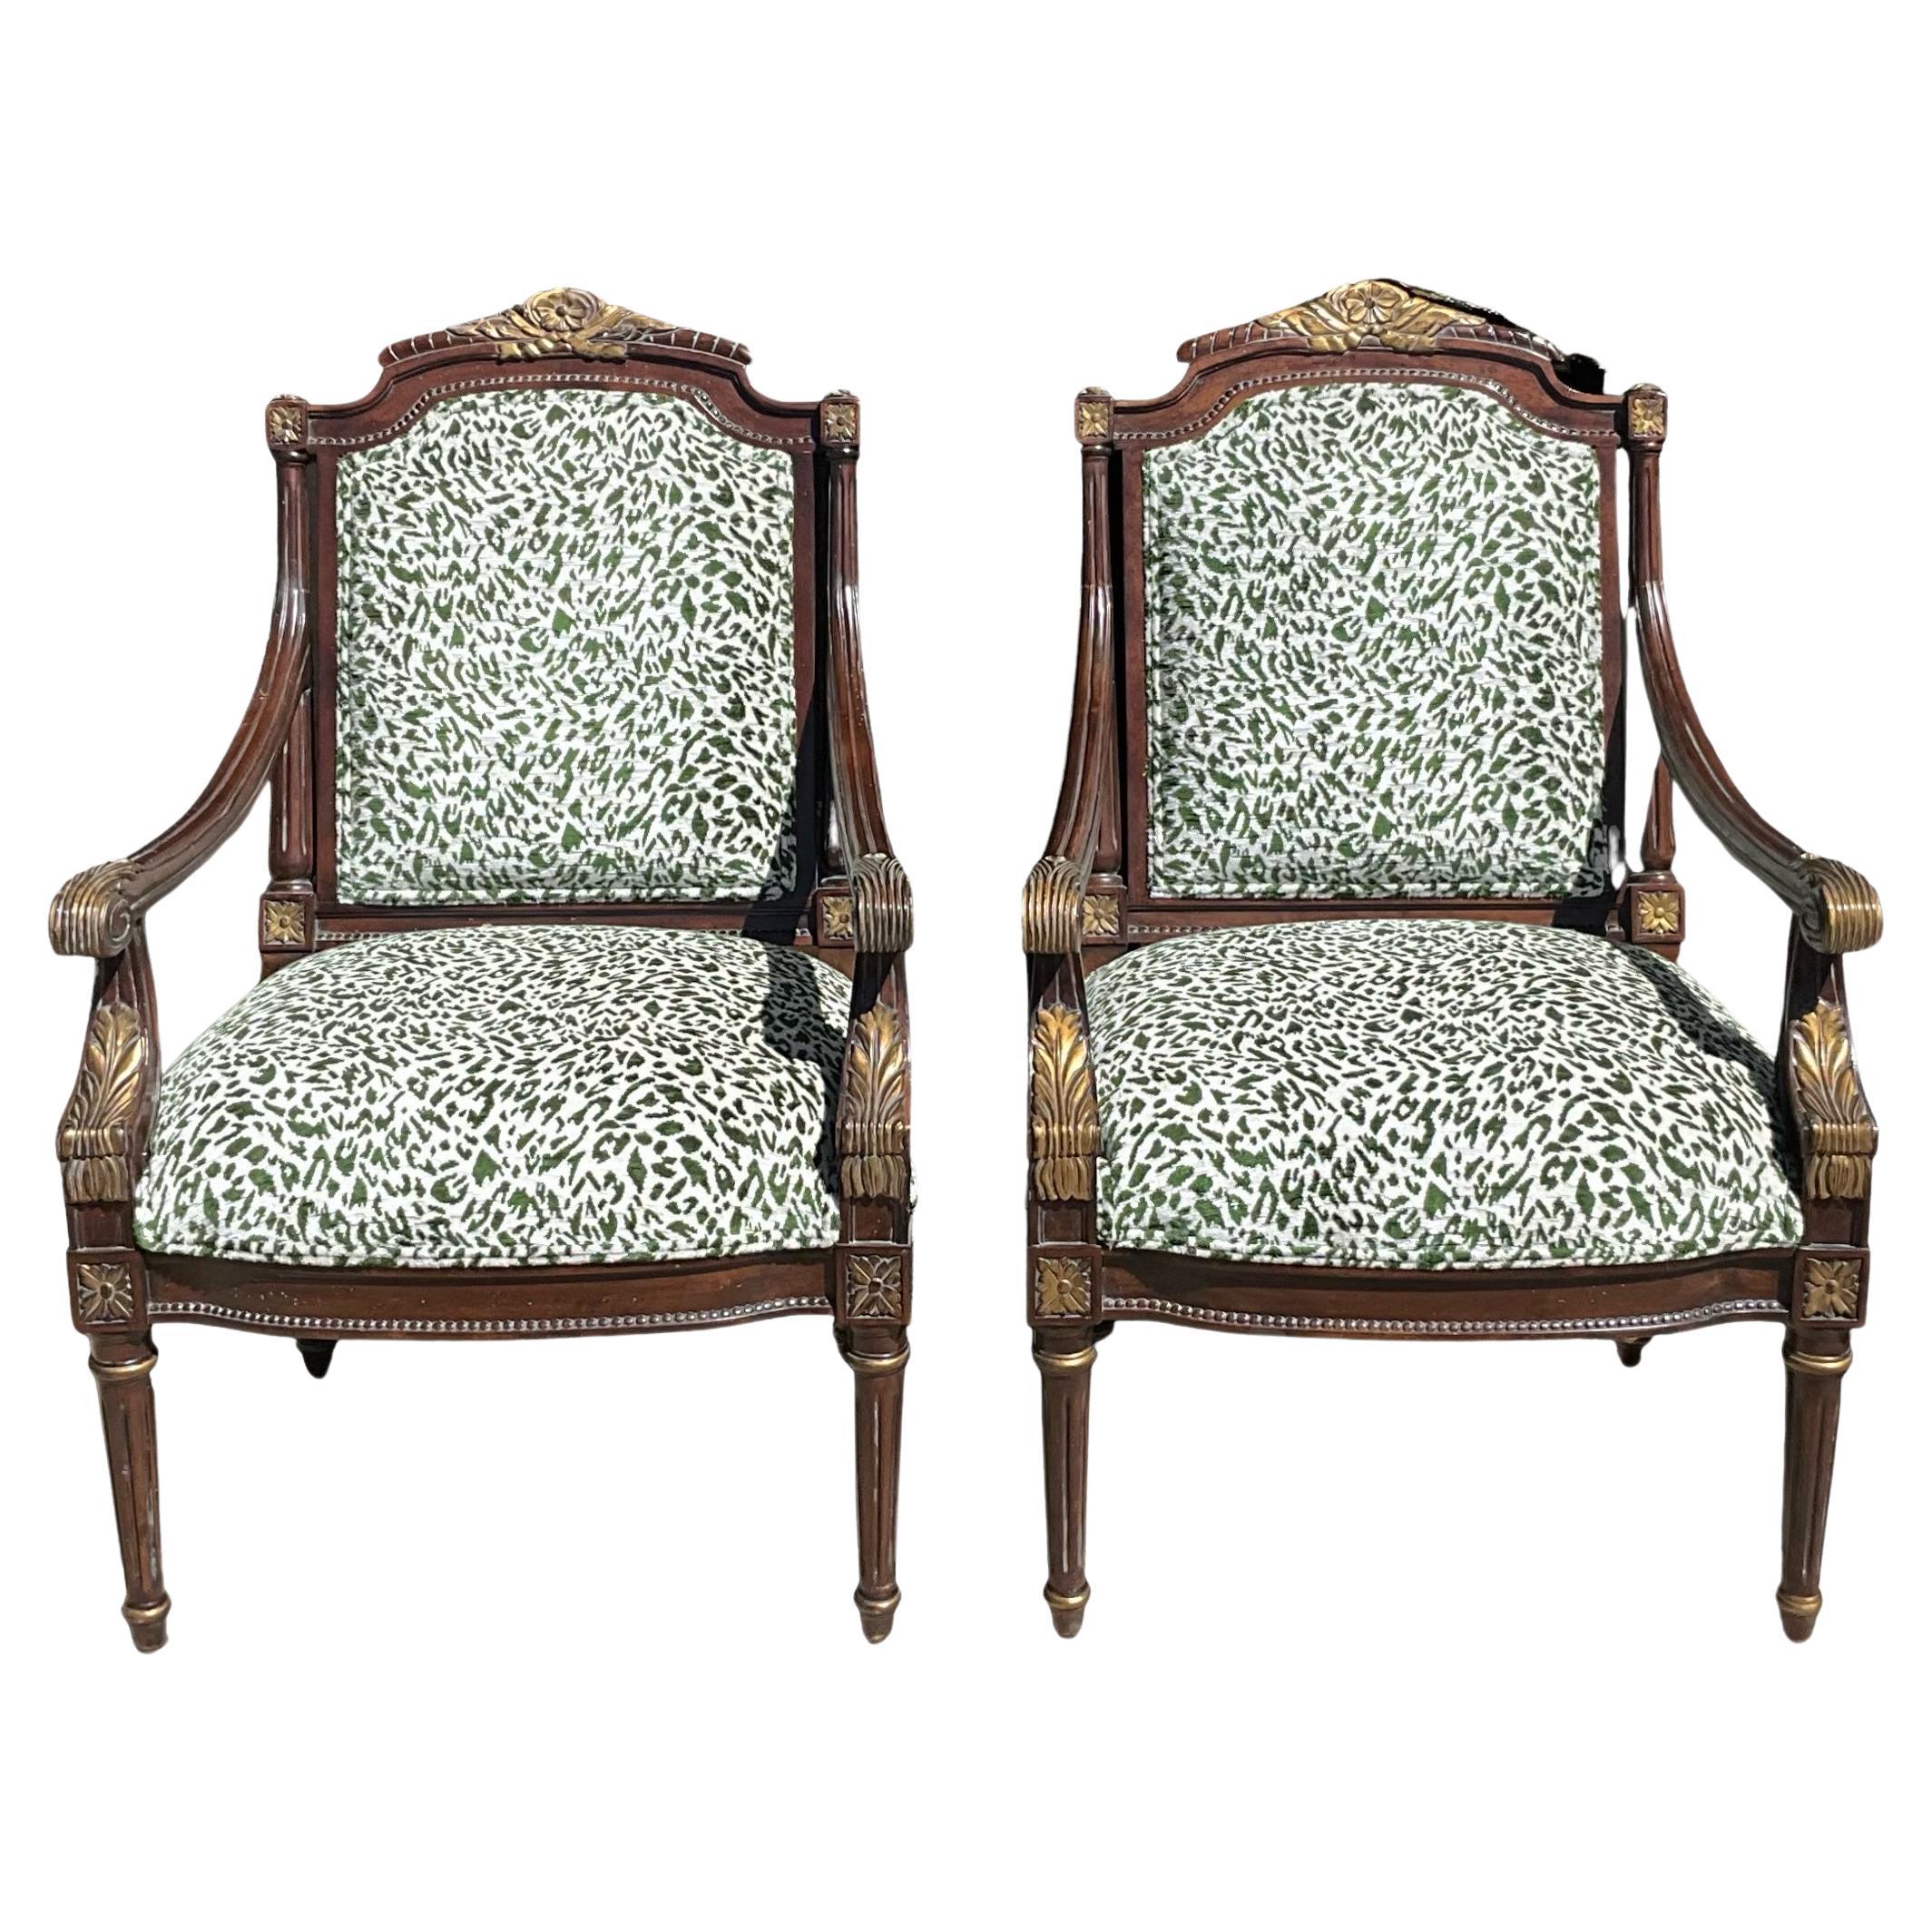 This is a lovely pair of French Louis XVI style carved mahogany and gilt painted accents. The green velvet leopard upholstery is new. The frames are intentionally distressed, unmarked and in very good condition. 

My shipping is running two to five